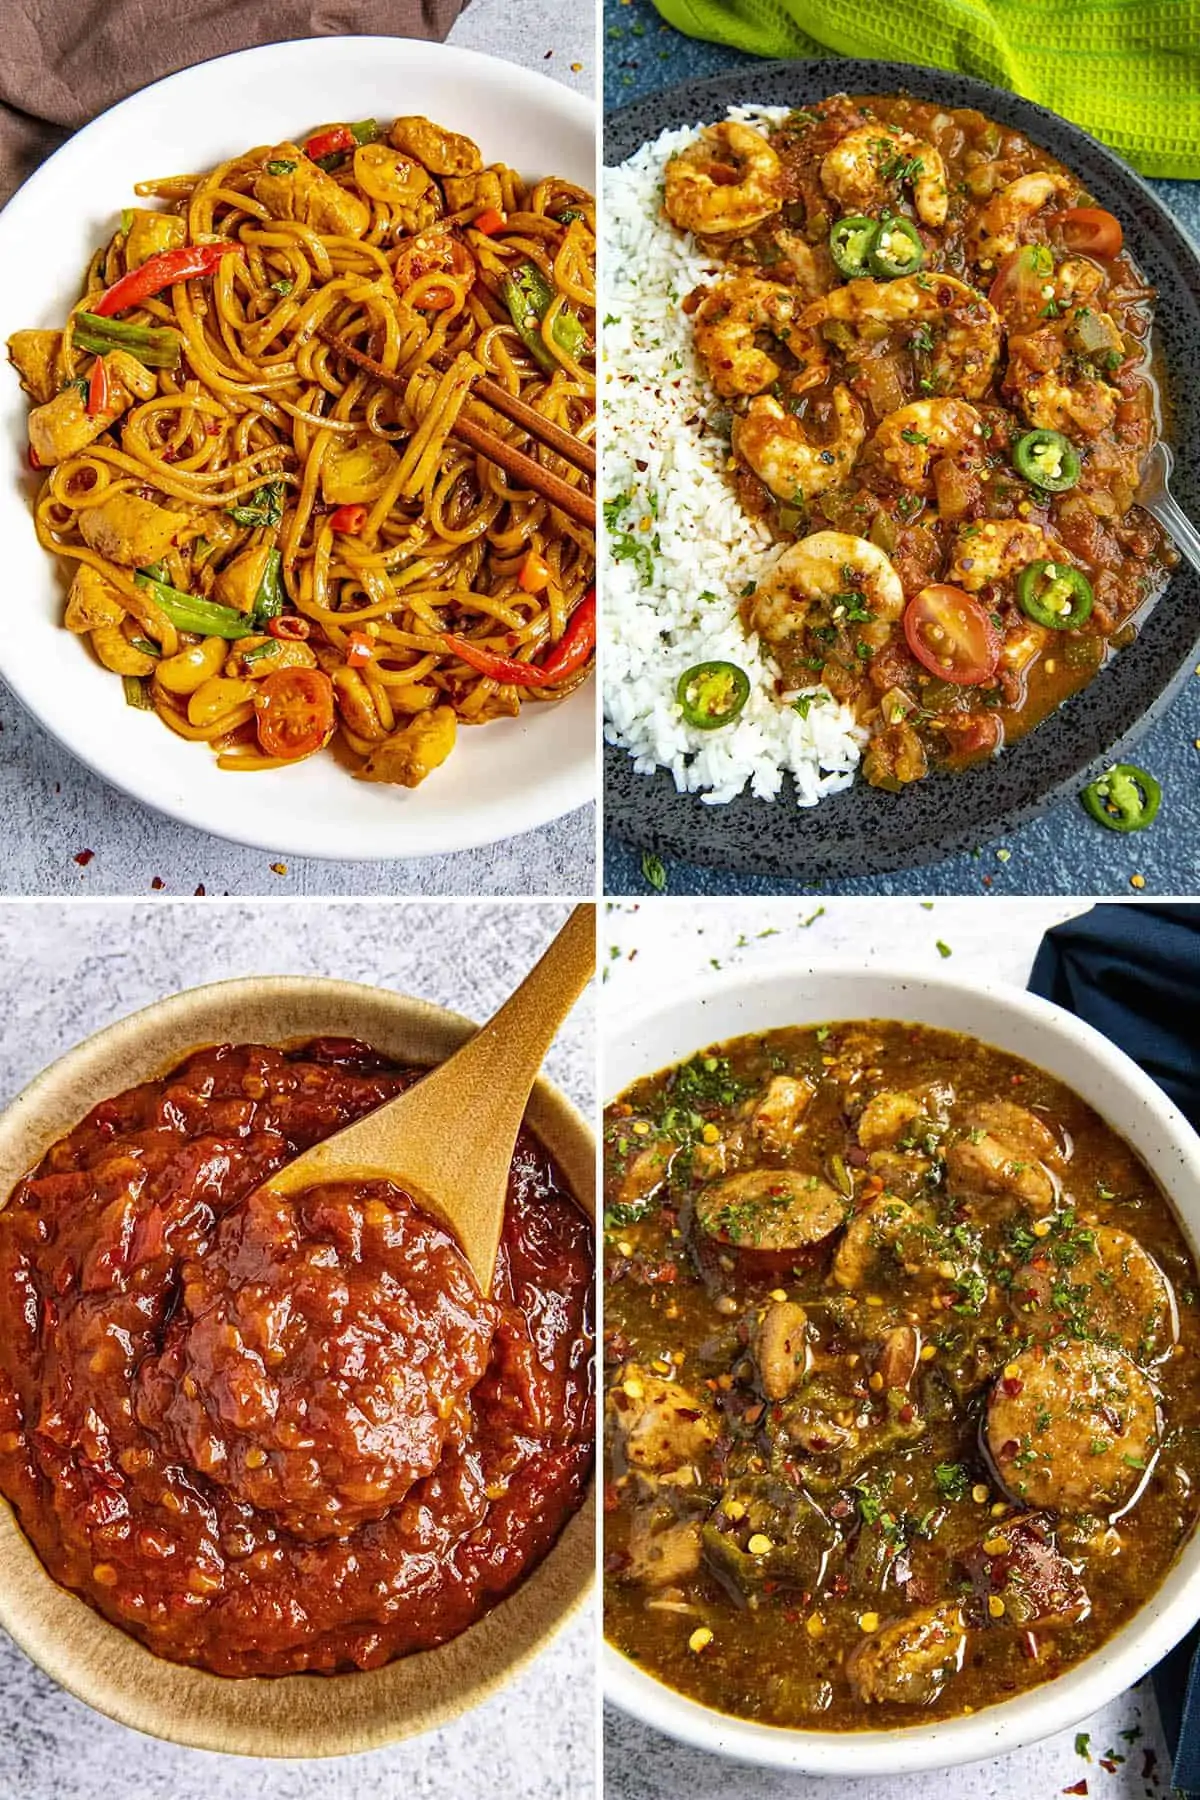 Recipes from Chili Pepper Madness